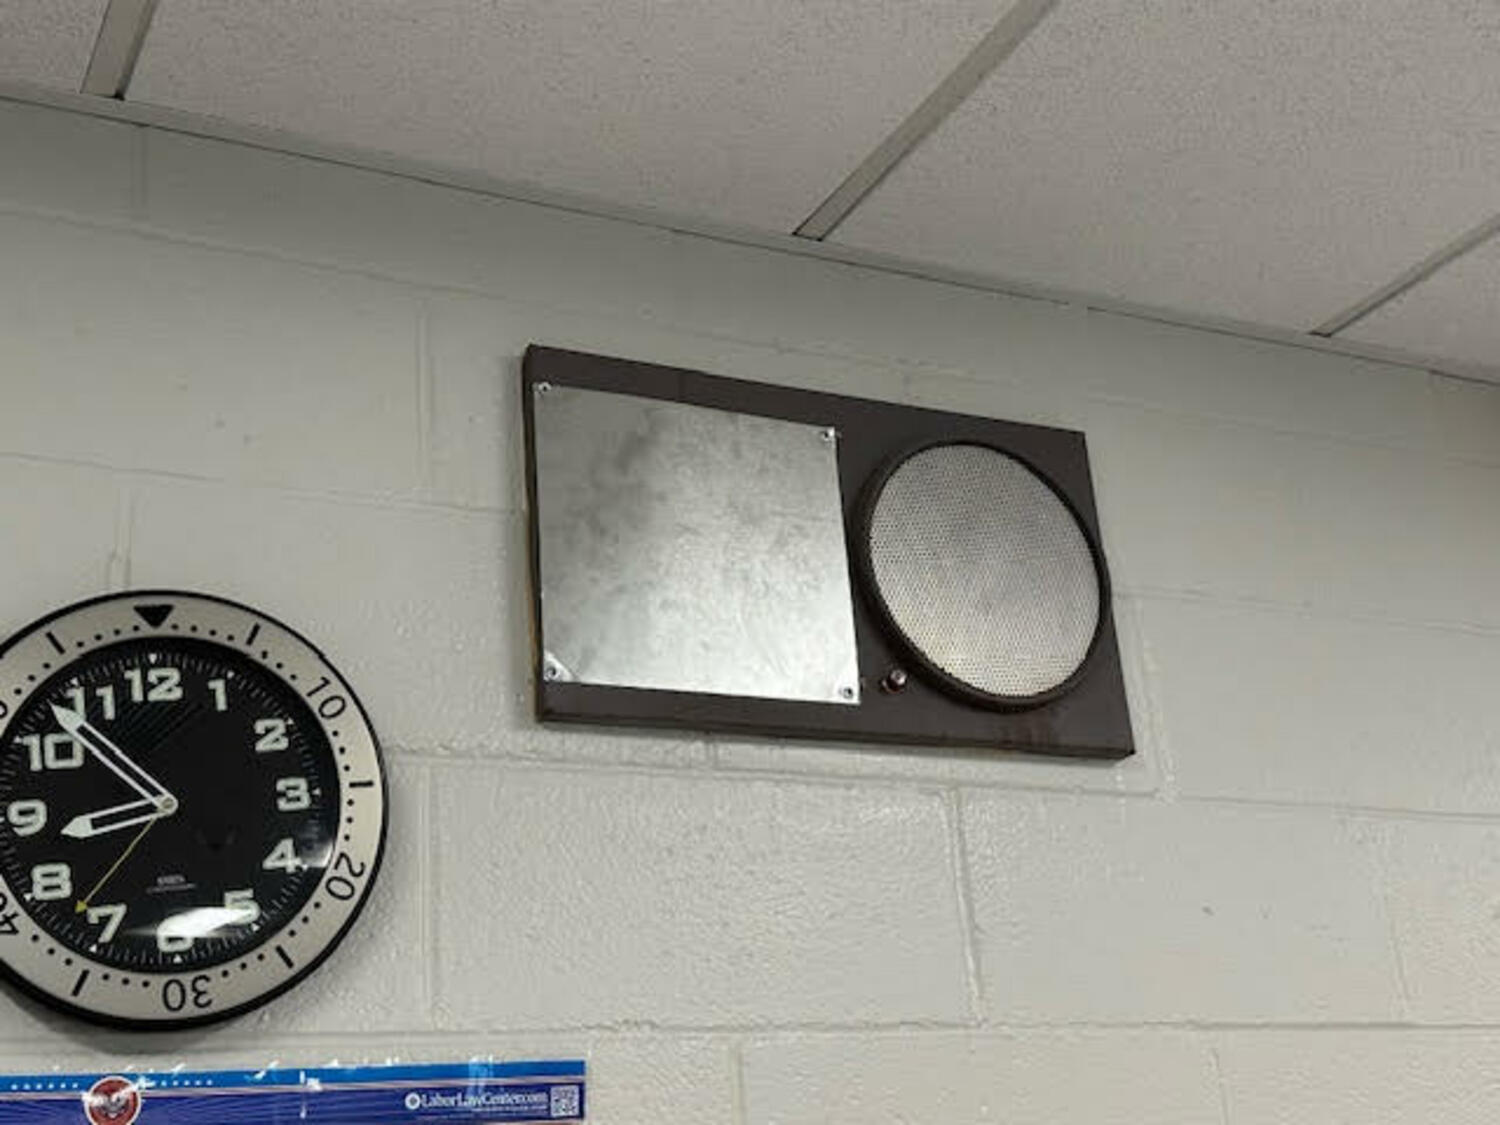 A clock and speaker that are part of the public address and bell system at East Hampton High School are no longer working. EAST HAMPTON SCHOOL DISTRICT